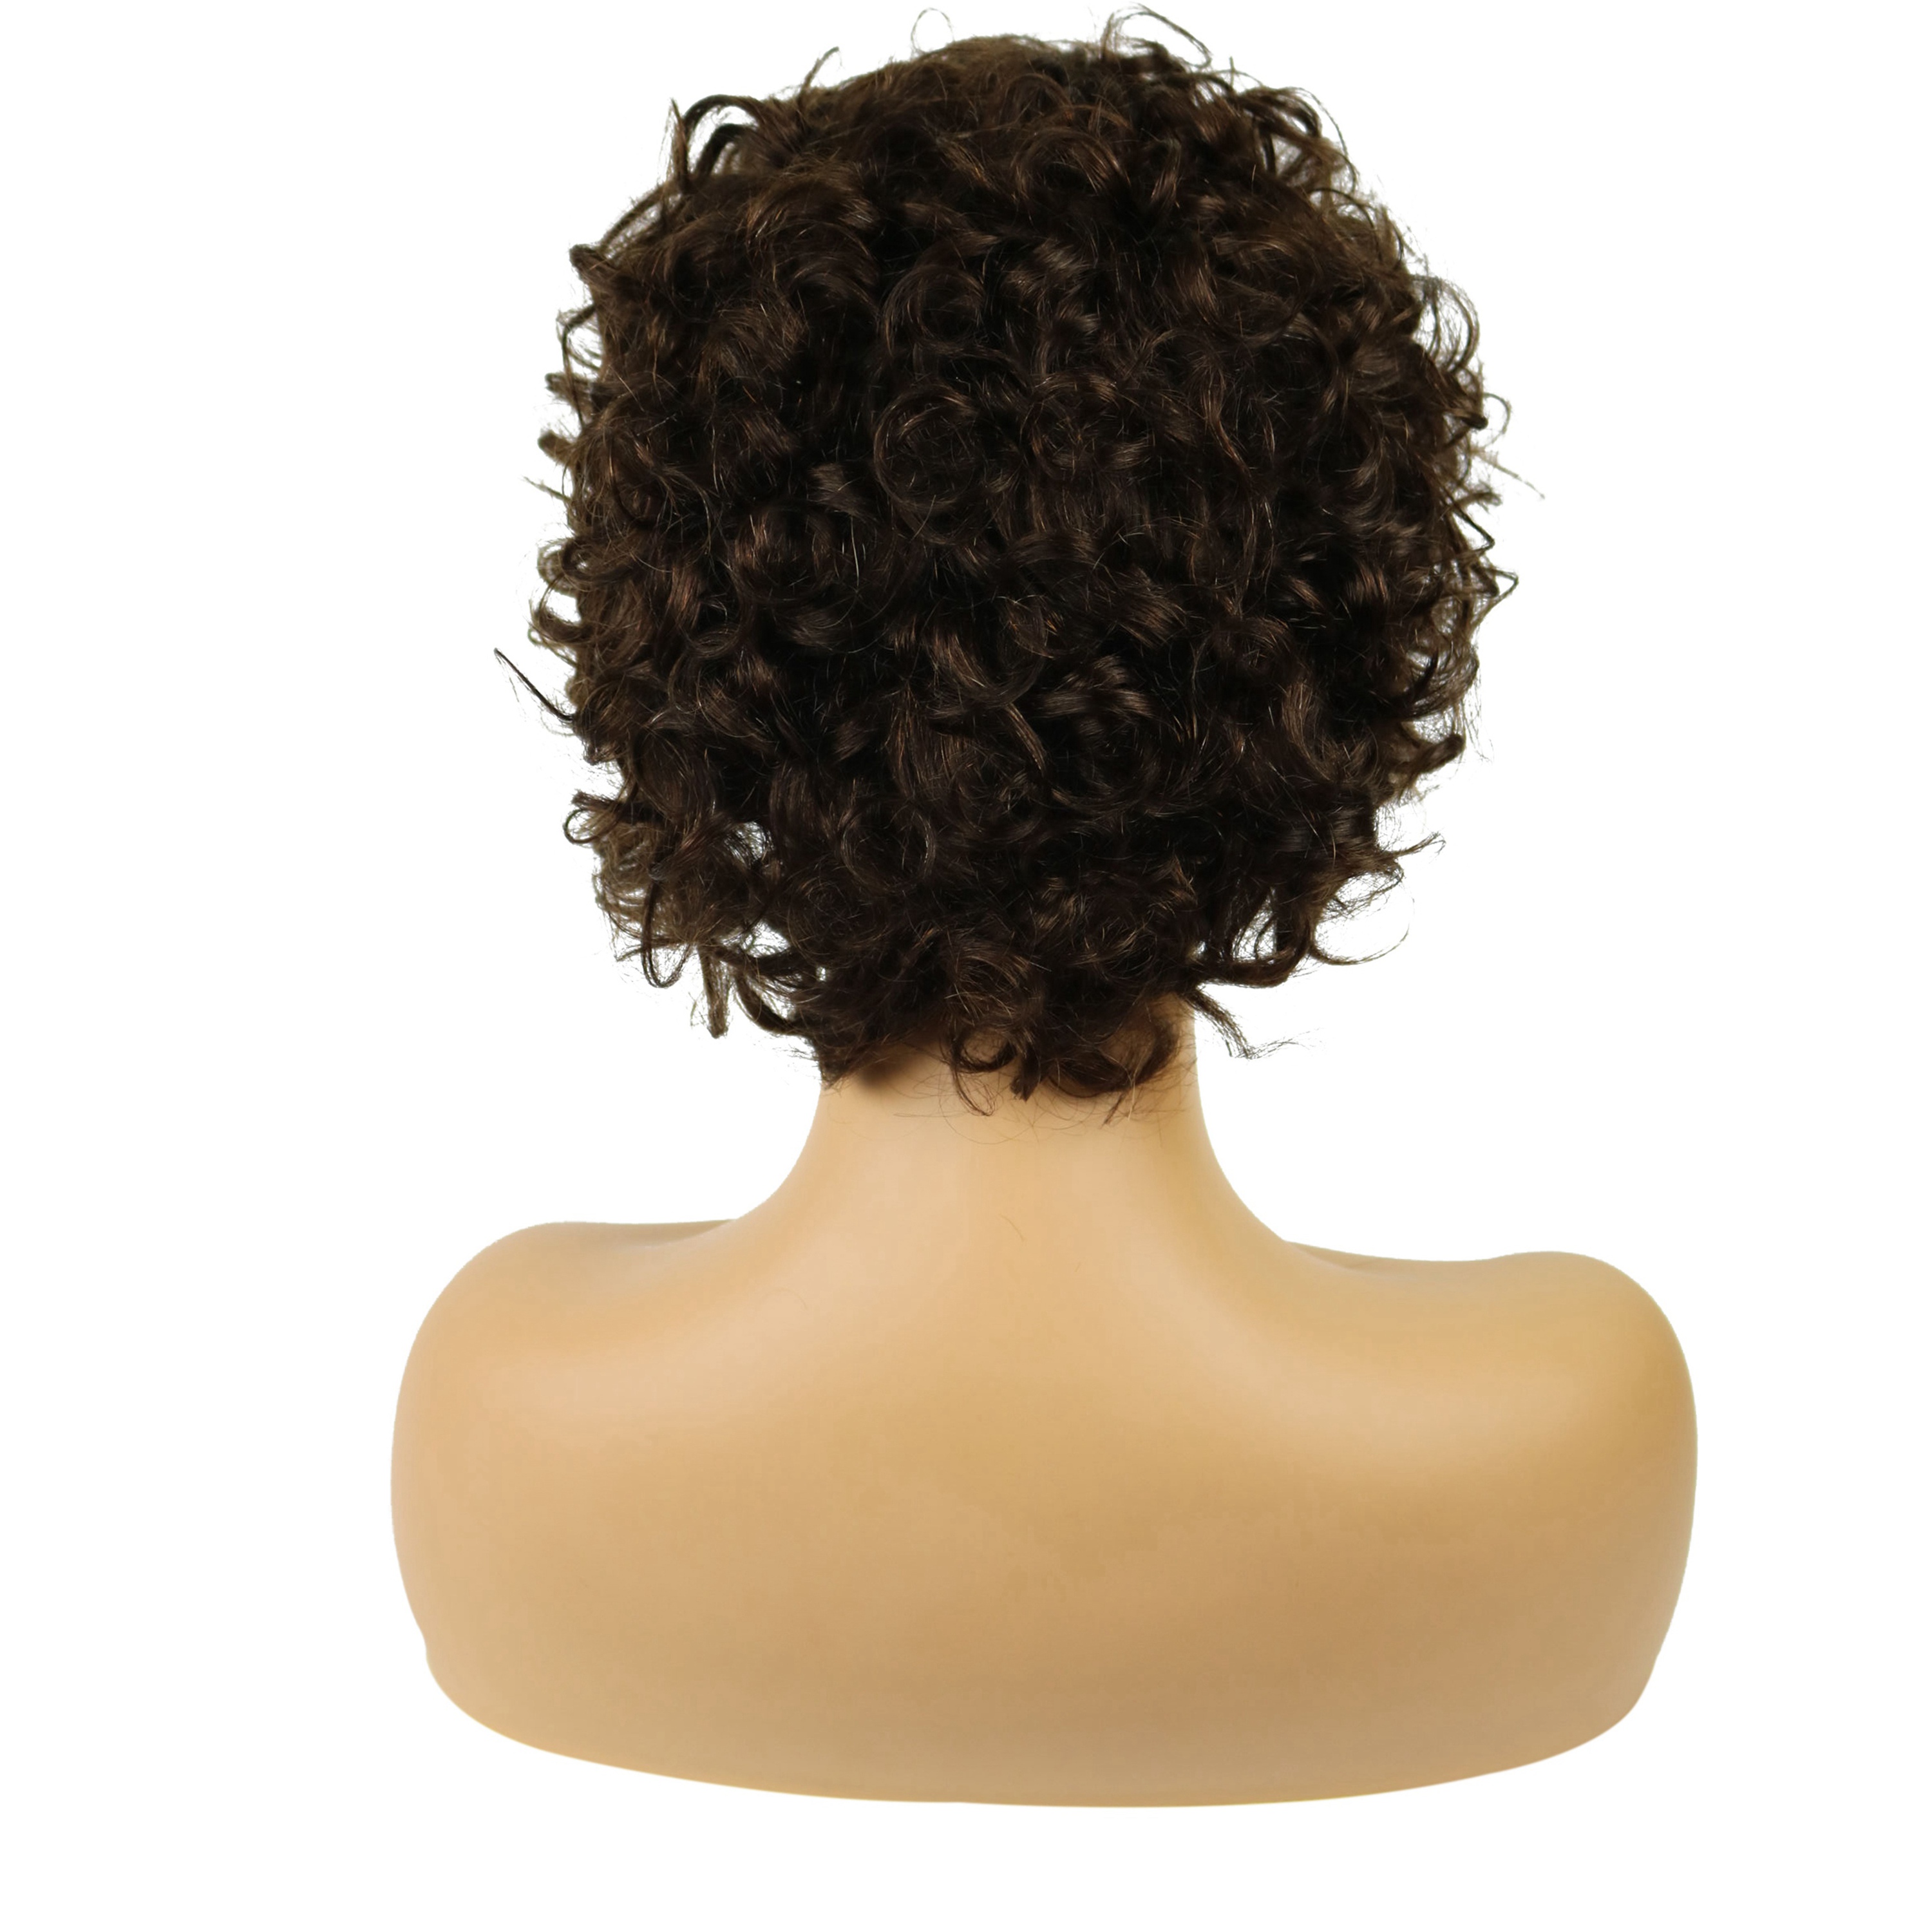 Curly Full Lace Cap Human Hair 120% Short Wigs For Black Women